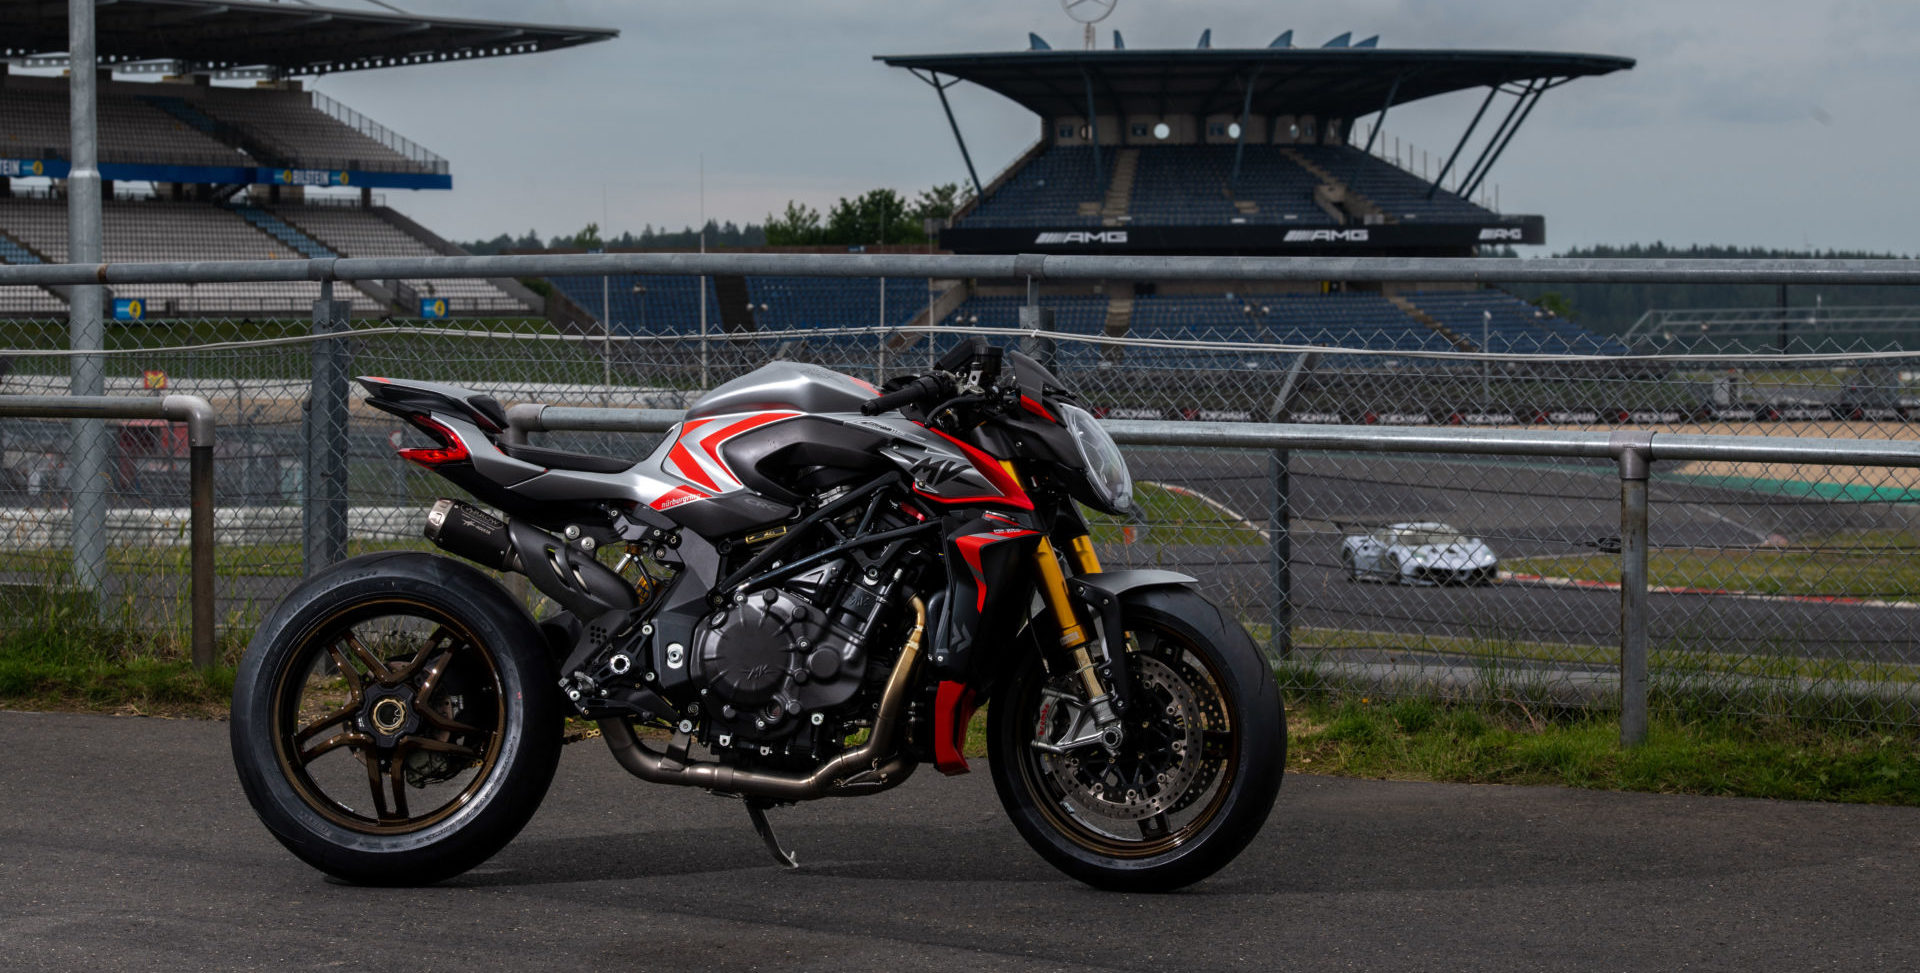 A 2022 MV Agusta Brutale 1000 Nürburgring with an Arrow titanium exhaust from the Racing Kit installed at Nürburgring, in Germany. Photo courtesy MV Agusta.